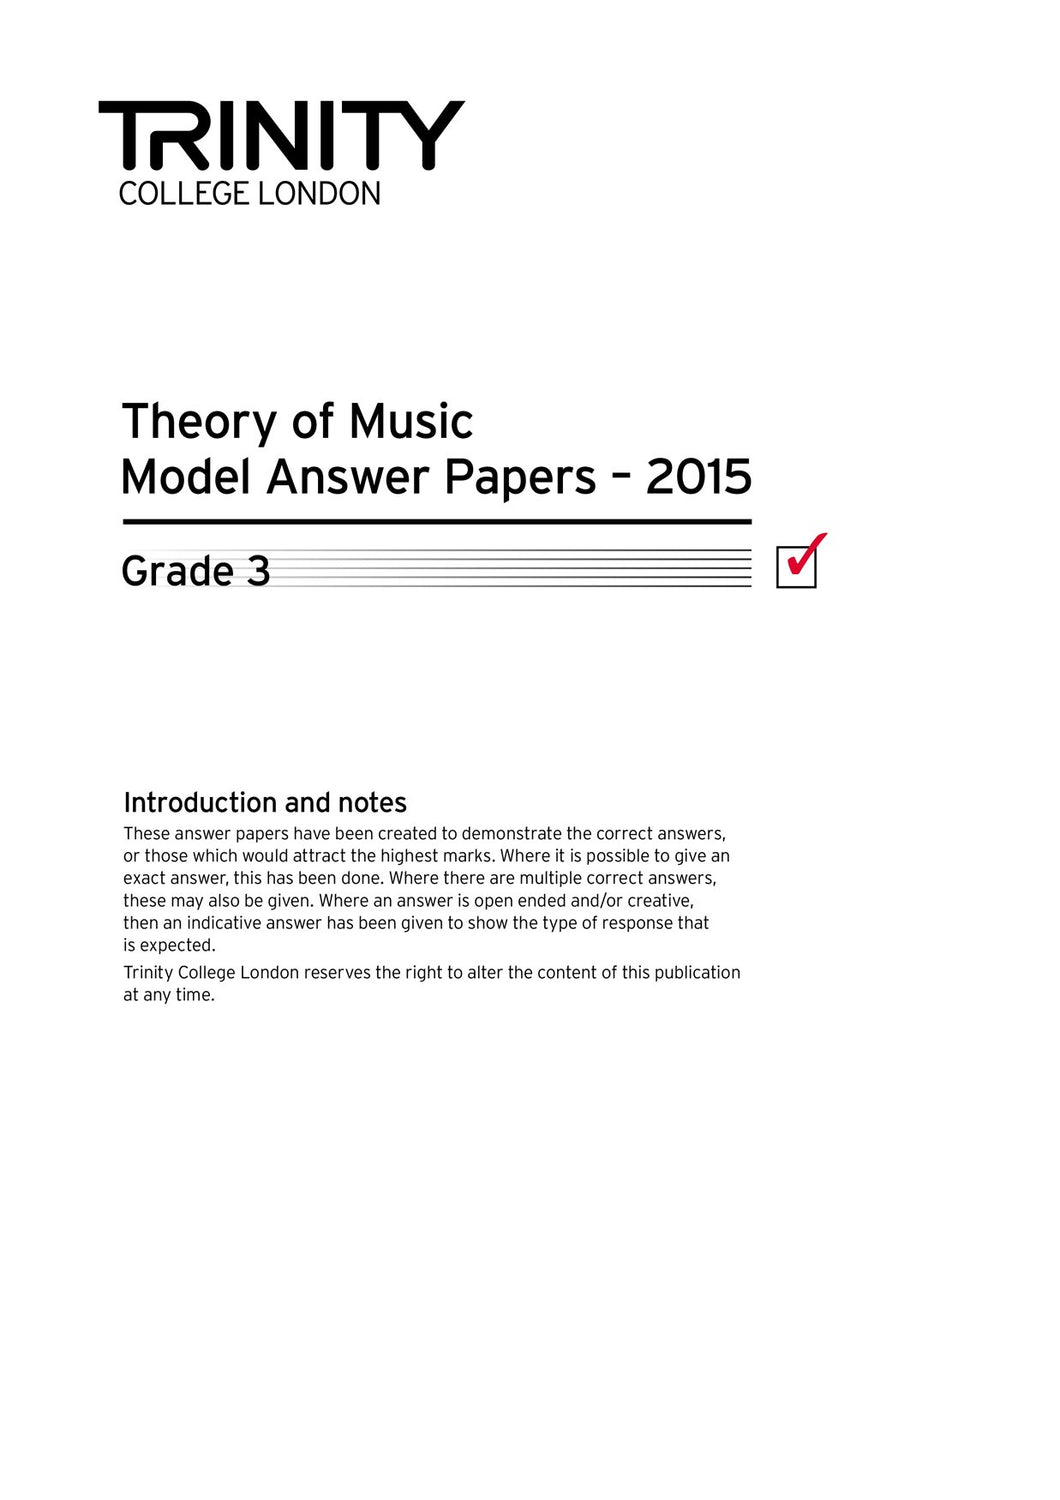 Theory Model Answer Papers 2015: Grade 3